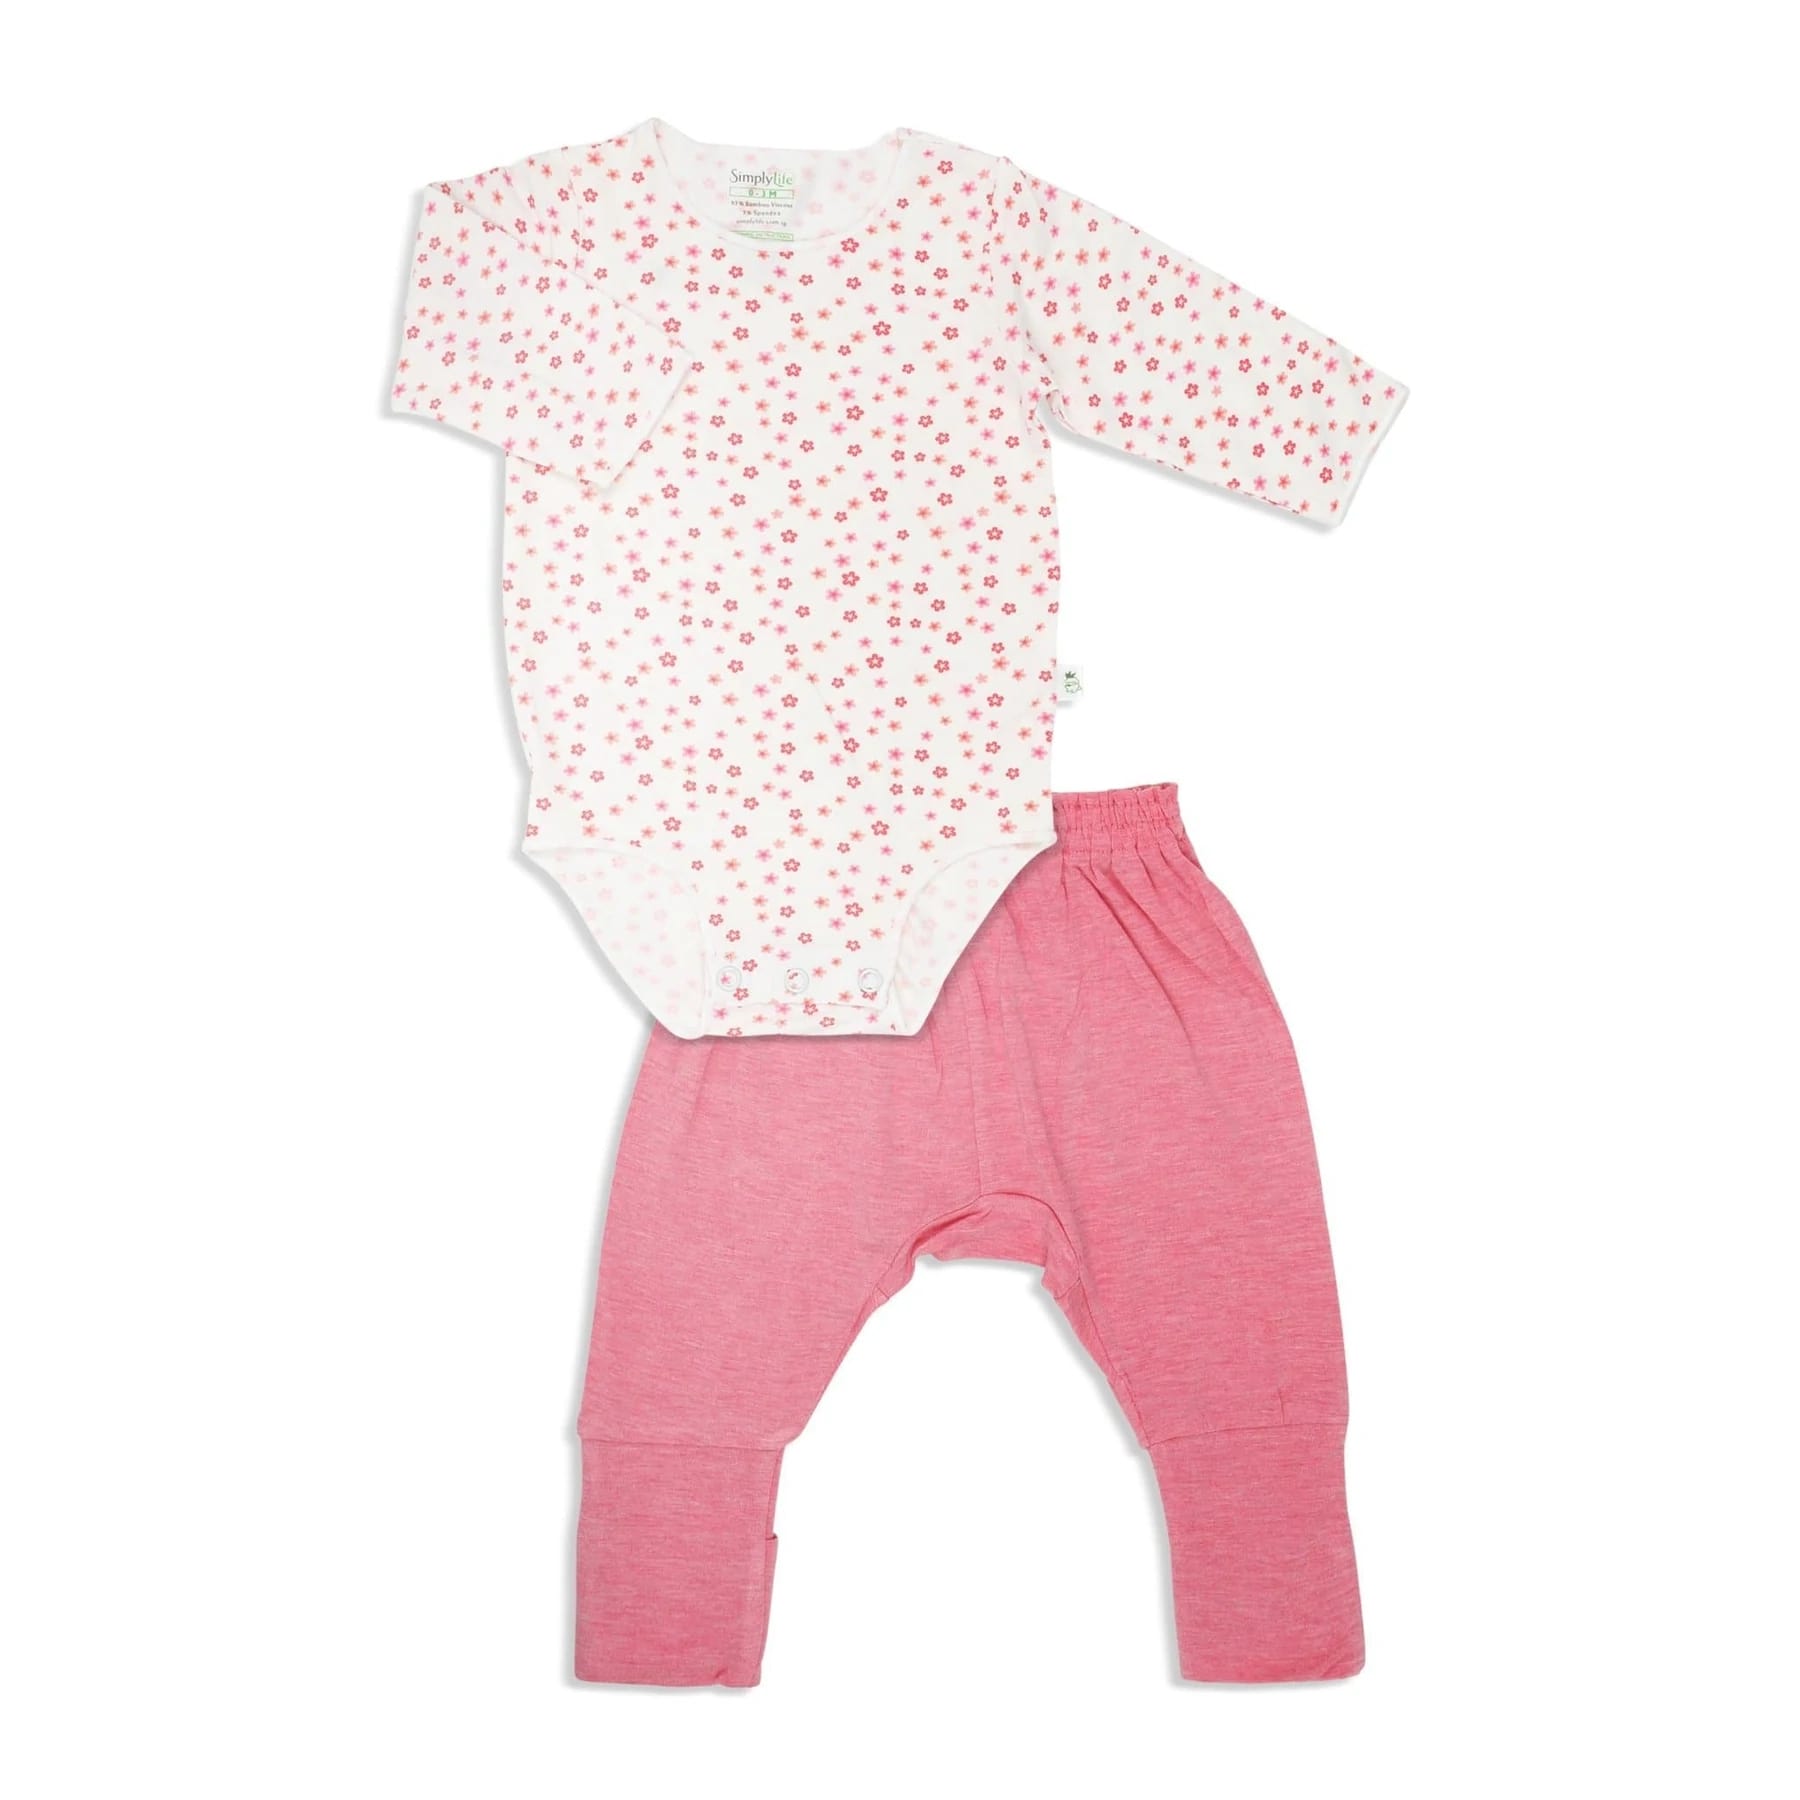 Simply Life Floral - Long-Sleeved Stretchy Romper With Foldable Footie Pants